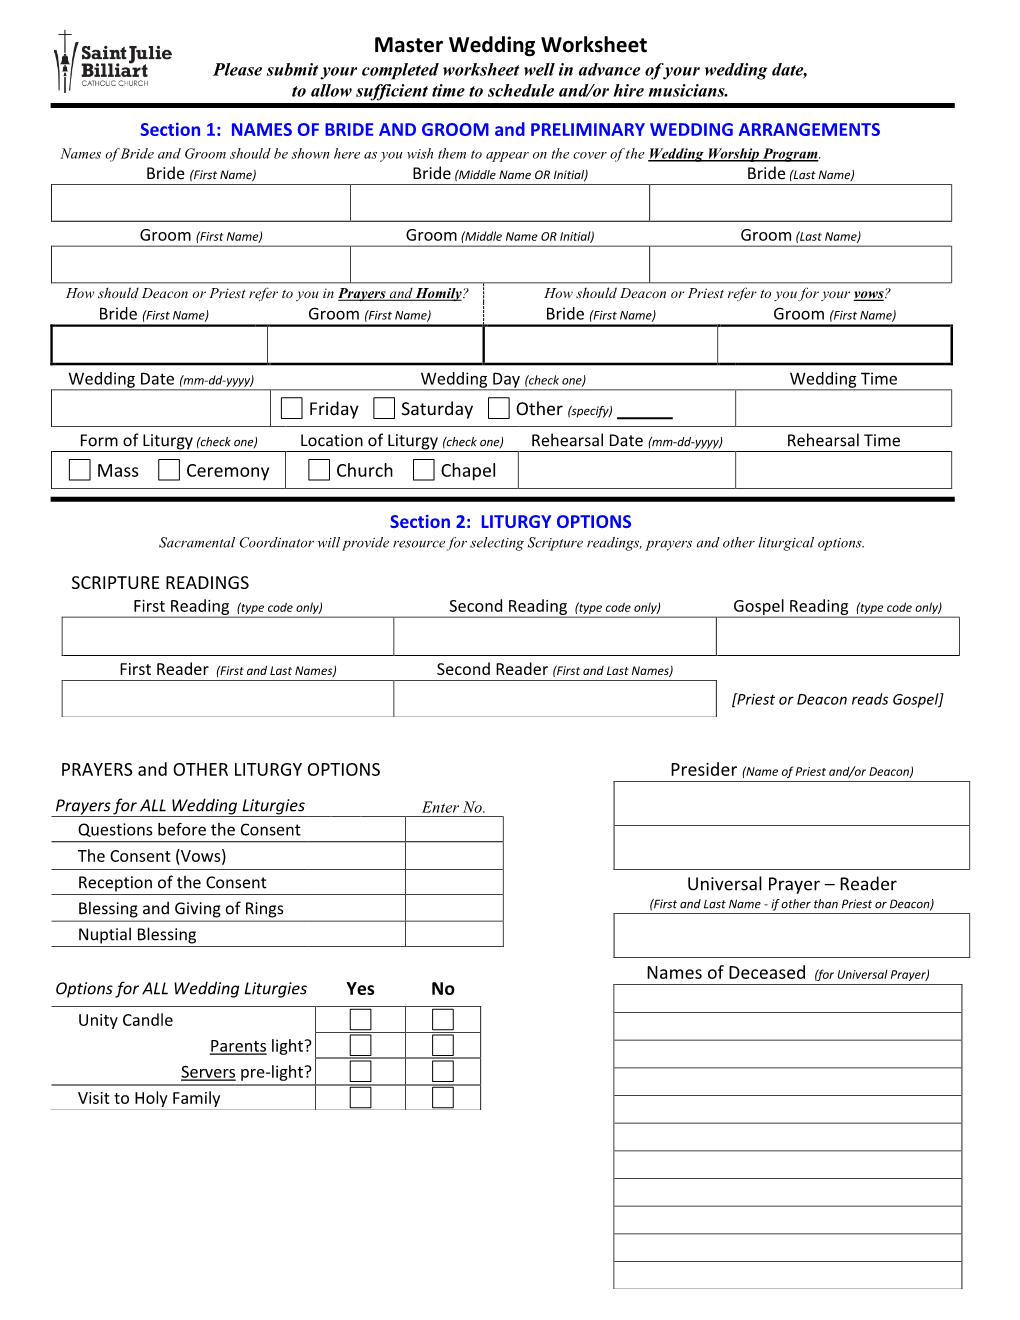 Master Wedding Worksheet Please Submit Your Completed Worksheet Well in Advance of Your Wedding Date, to Allow Sufficient Time to Schedule And/Or Hire Musicians